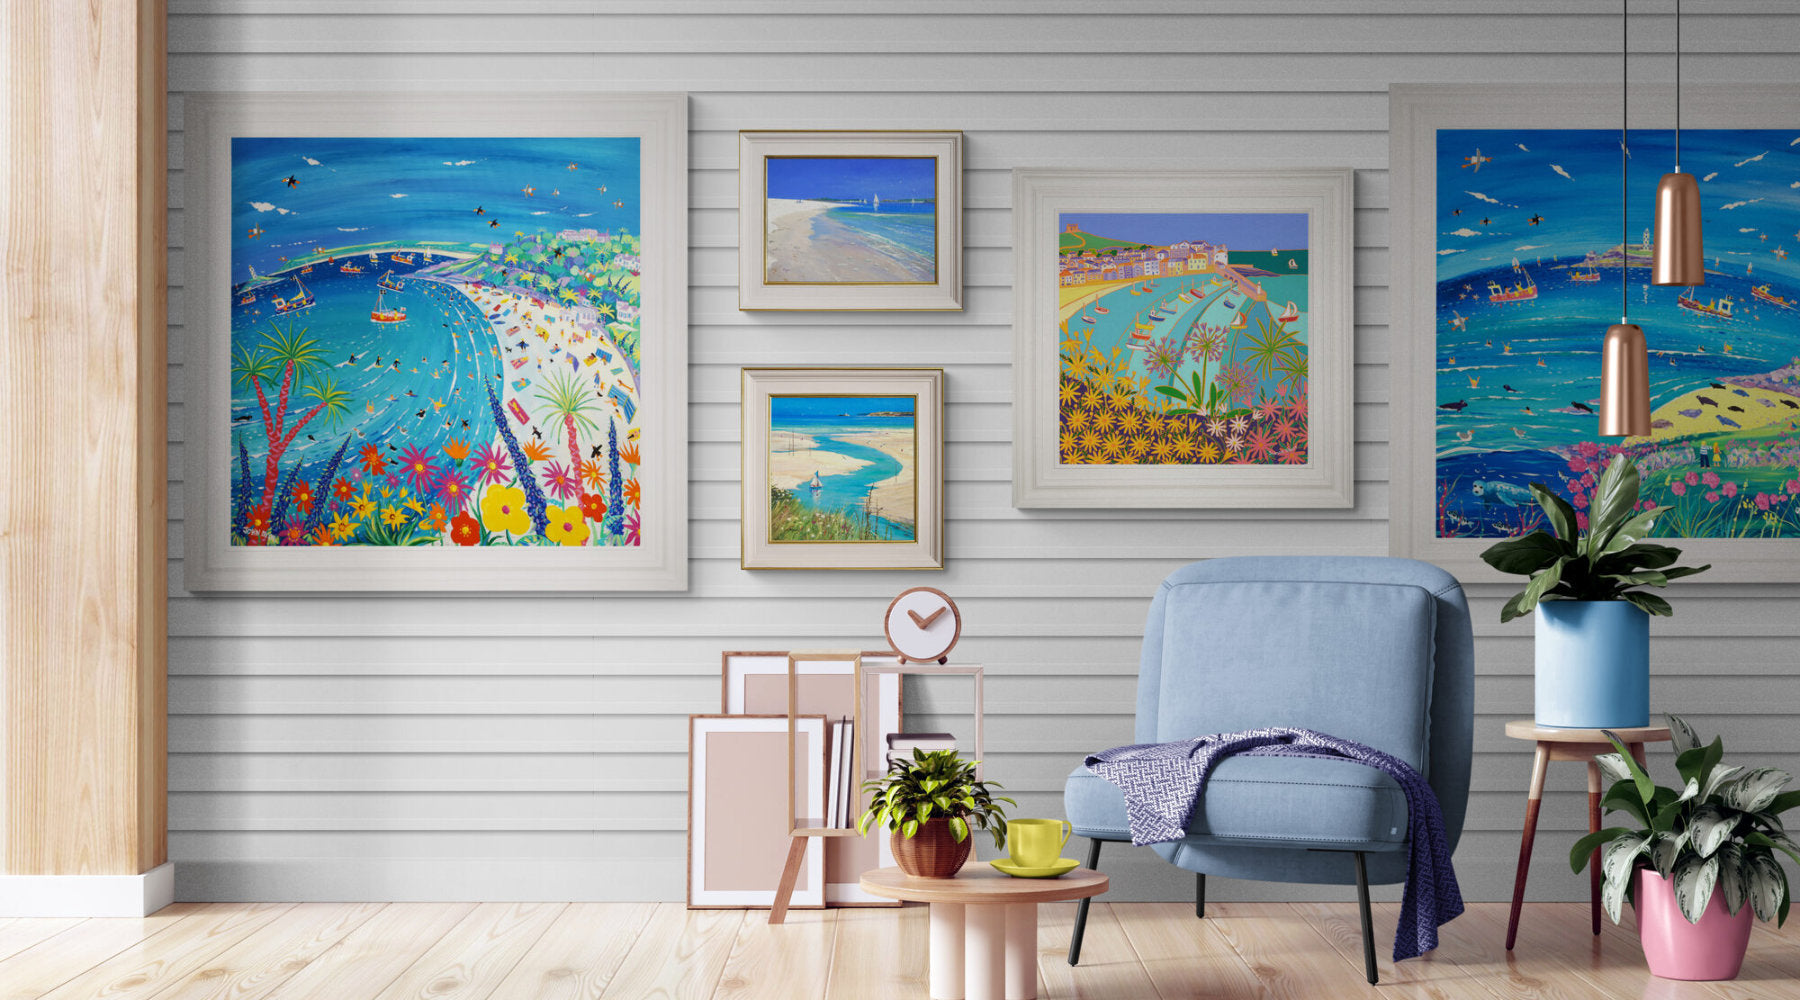 Buy seascape painting of Cornwall from the John Dyer Gallery